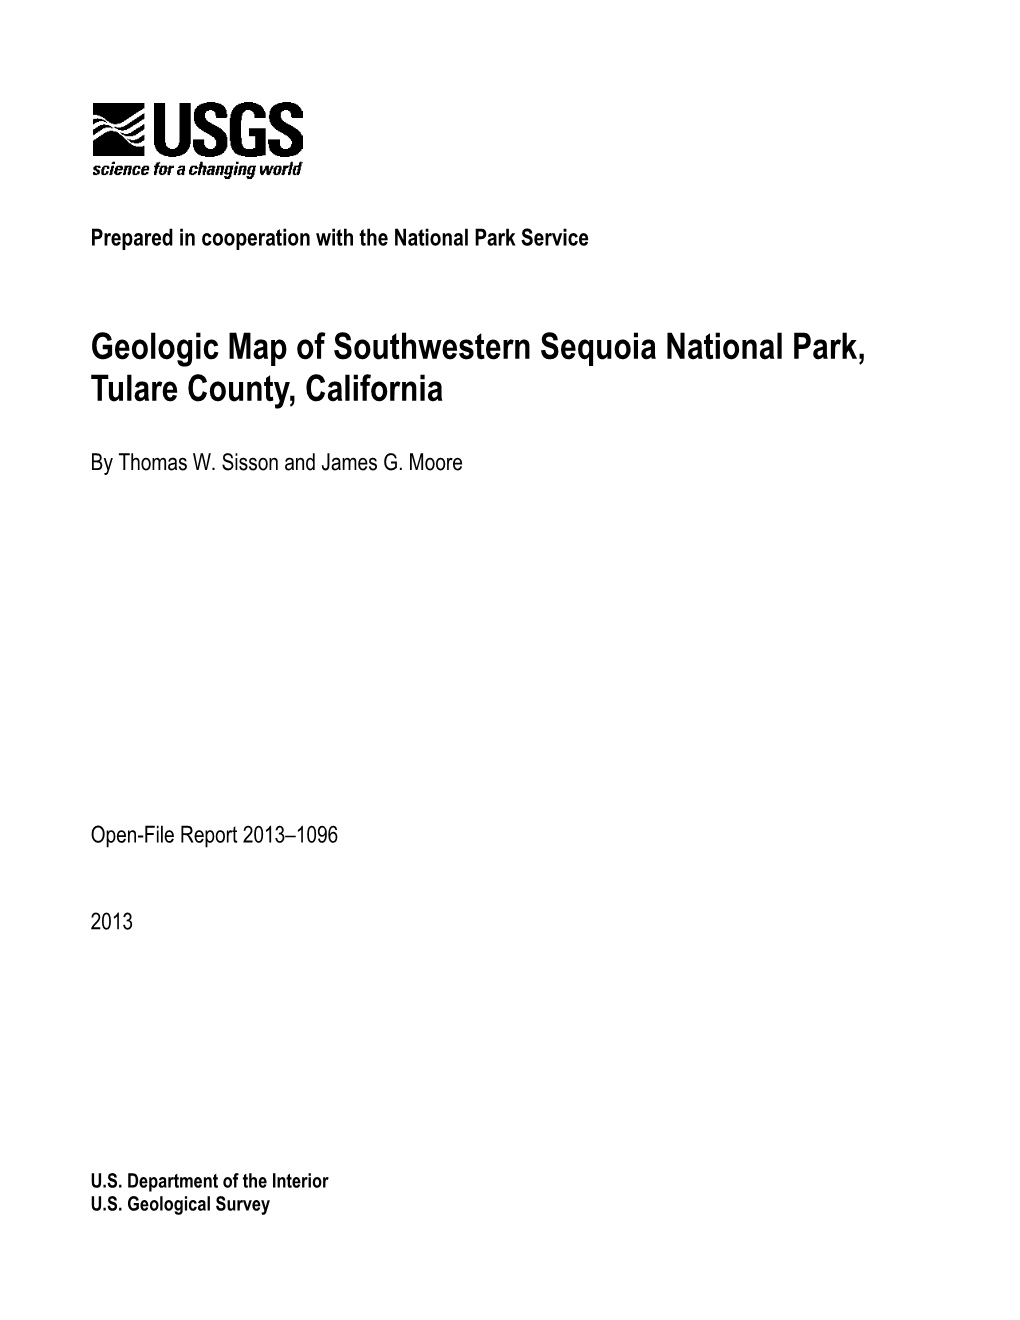 Geologic Map of Southwestern Sequoia National Park, Tulare County, California